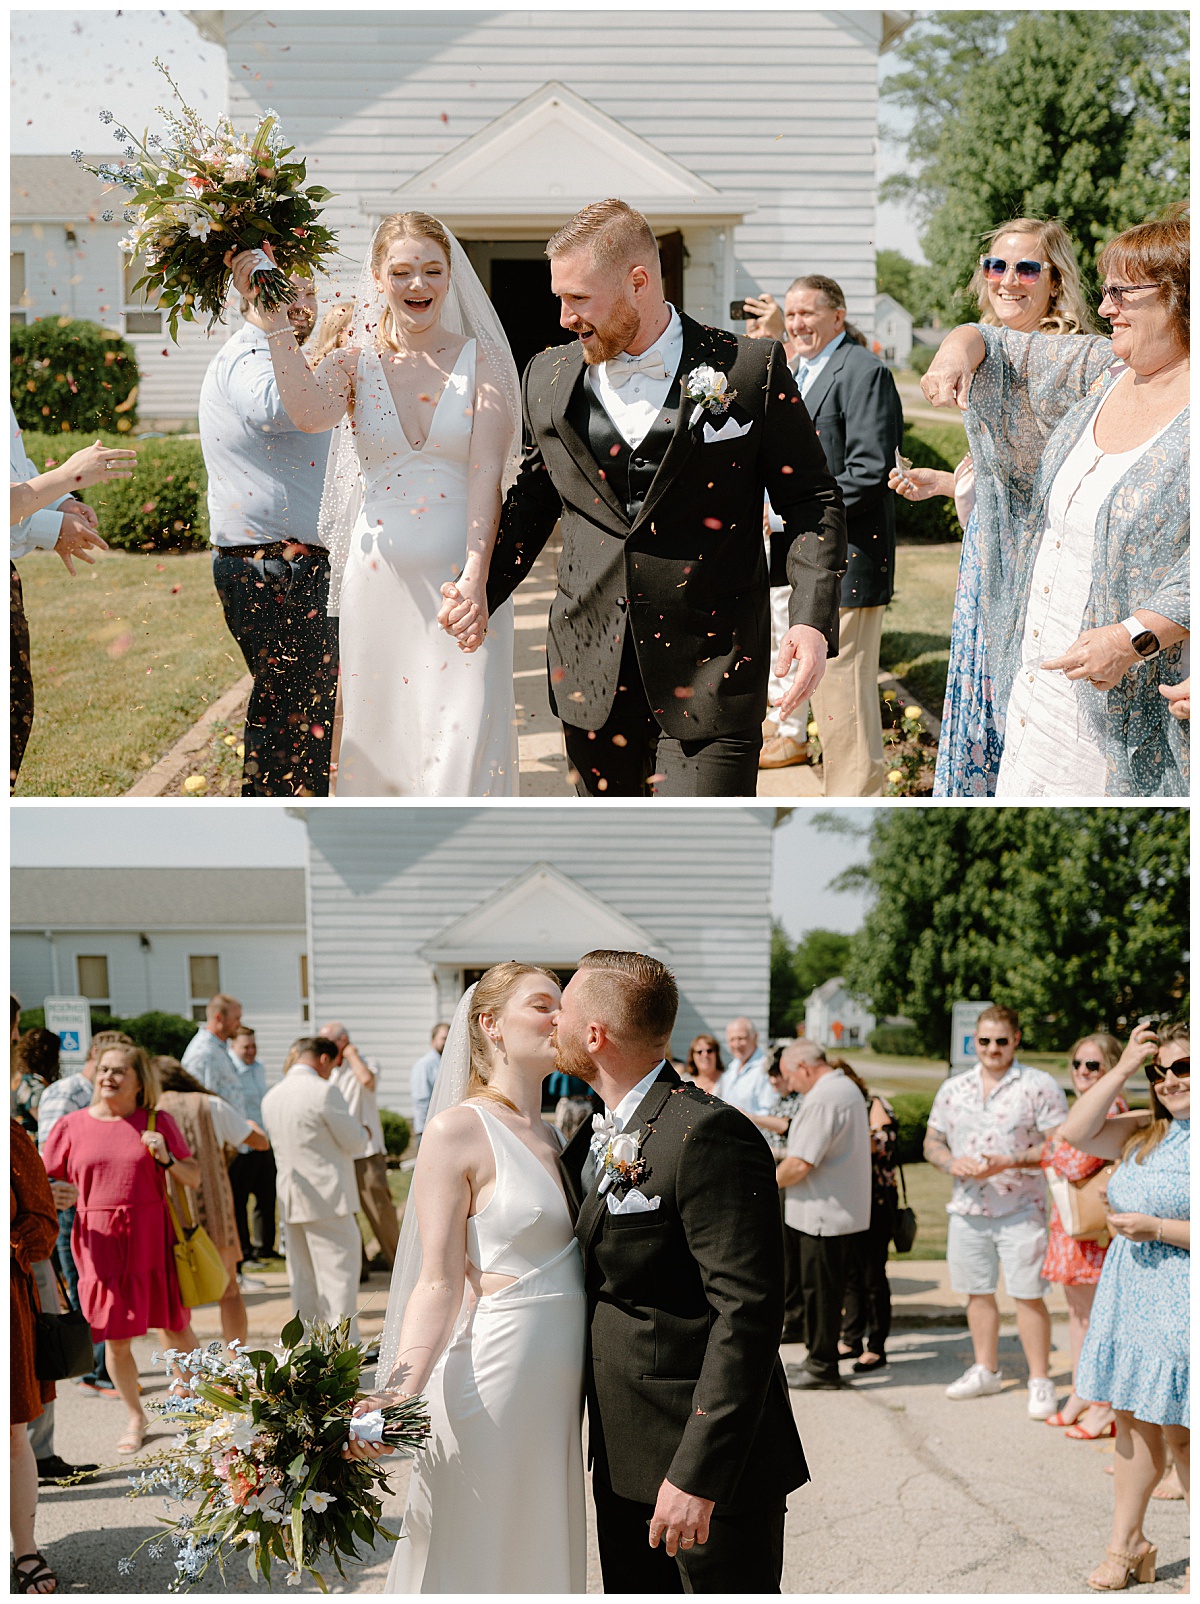 guest throw dried flowers as couple exits ceremony by Indigo Lace Collective